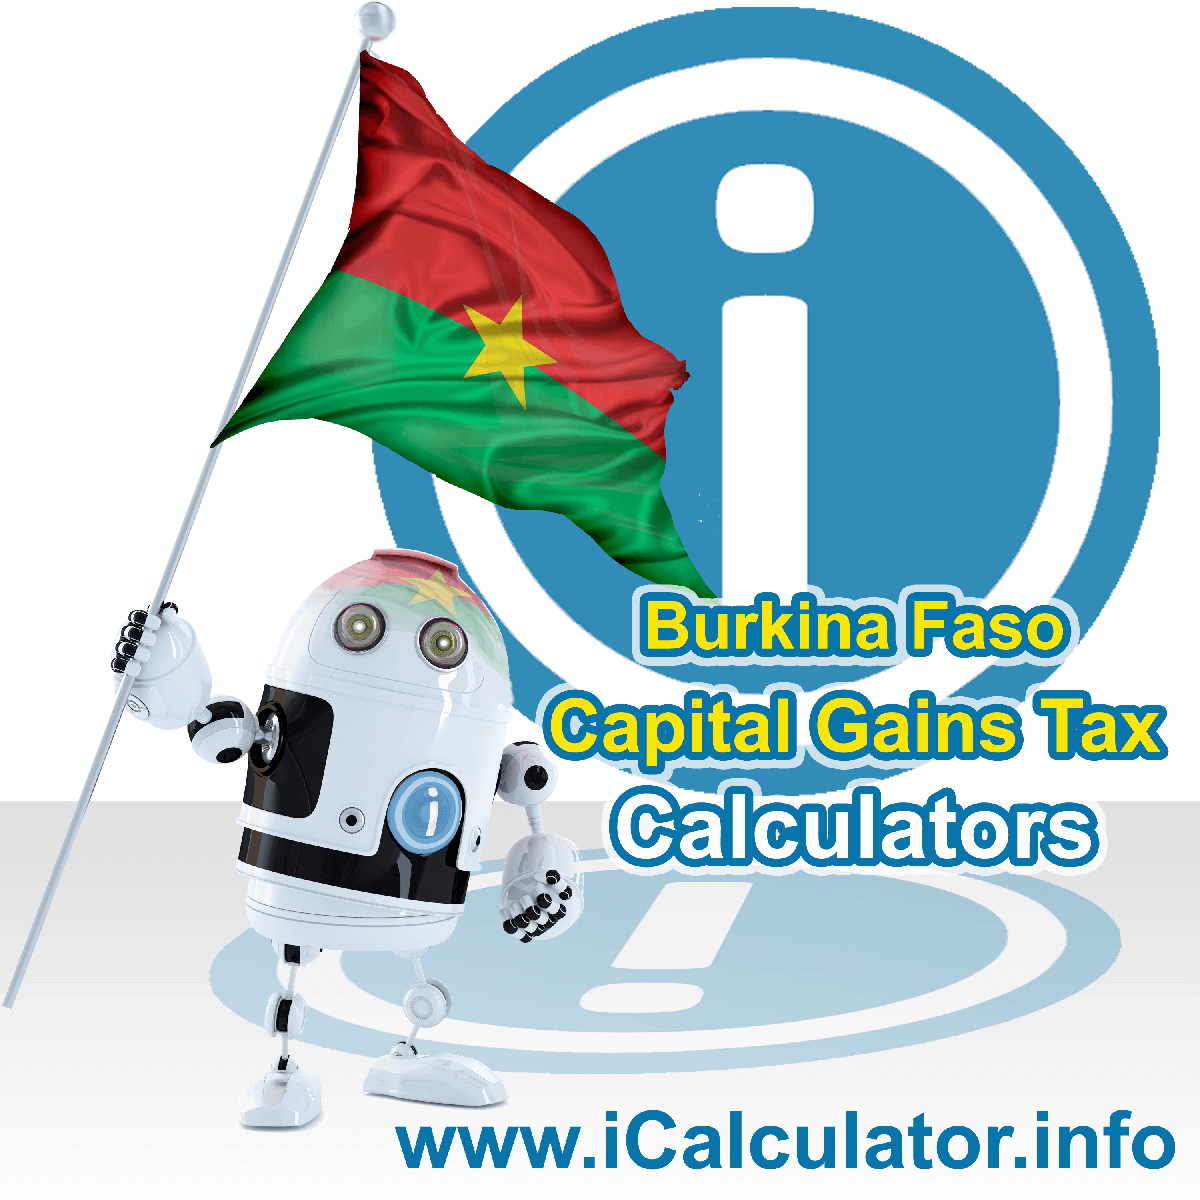 Burkina Faso Capital Gains Tax Calculator. This image shows the Burkina Faso flag and information relating to the capital gains tax rate formula used for calculating Capital Gains Tax in Burkina Faso using the Burkina Faso Capital Gains Tax Calculator in 2023